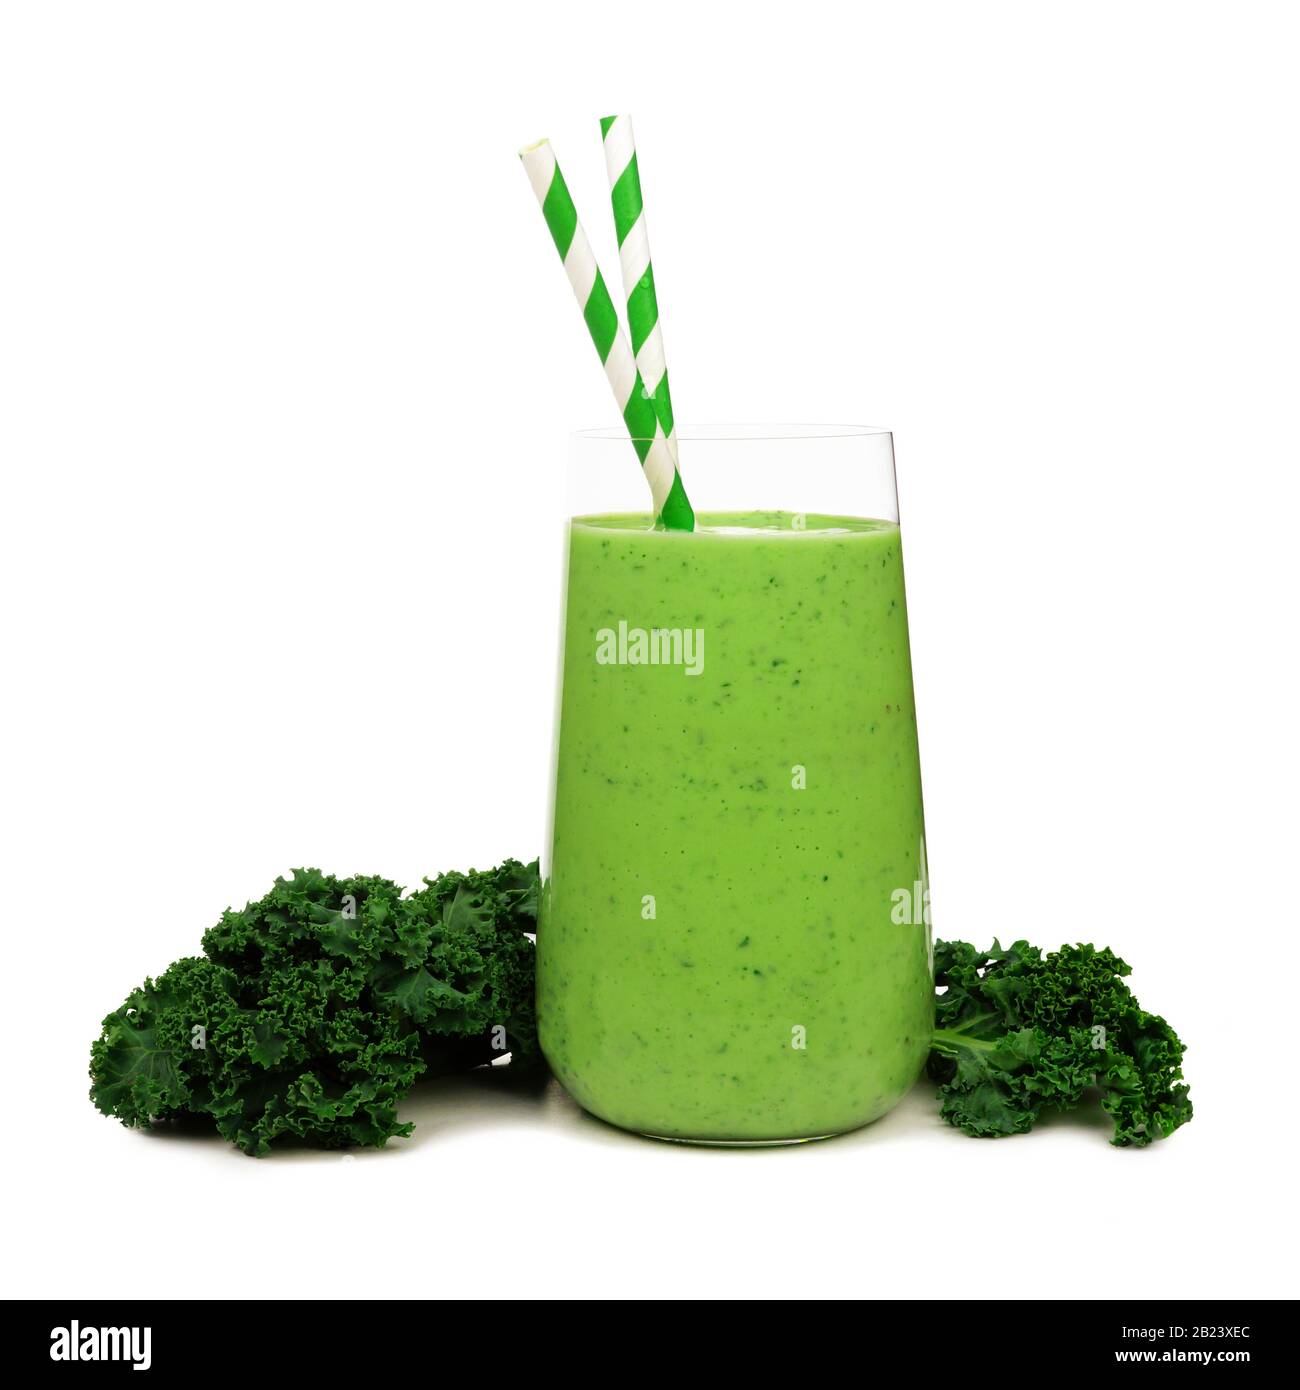 Green smoothie in a glass tumbler with kale and paper straws isolated on a white background Stock Photo